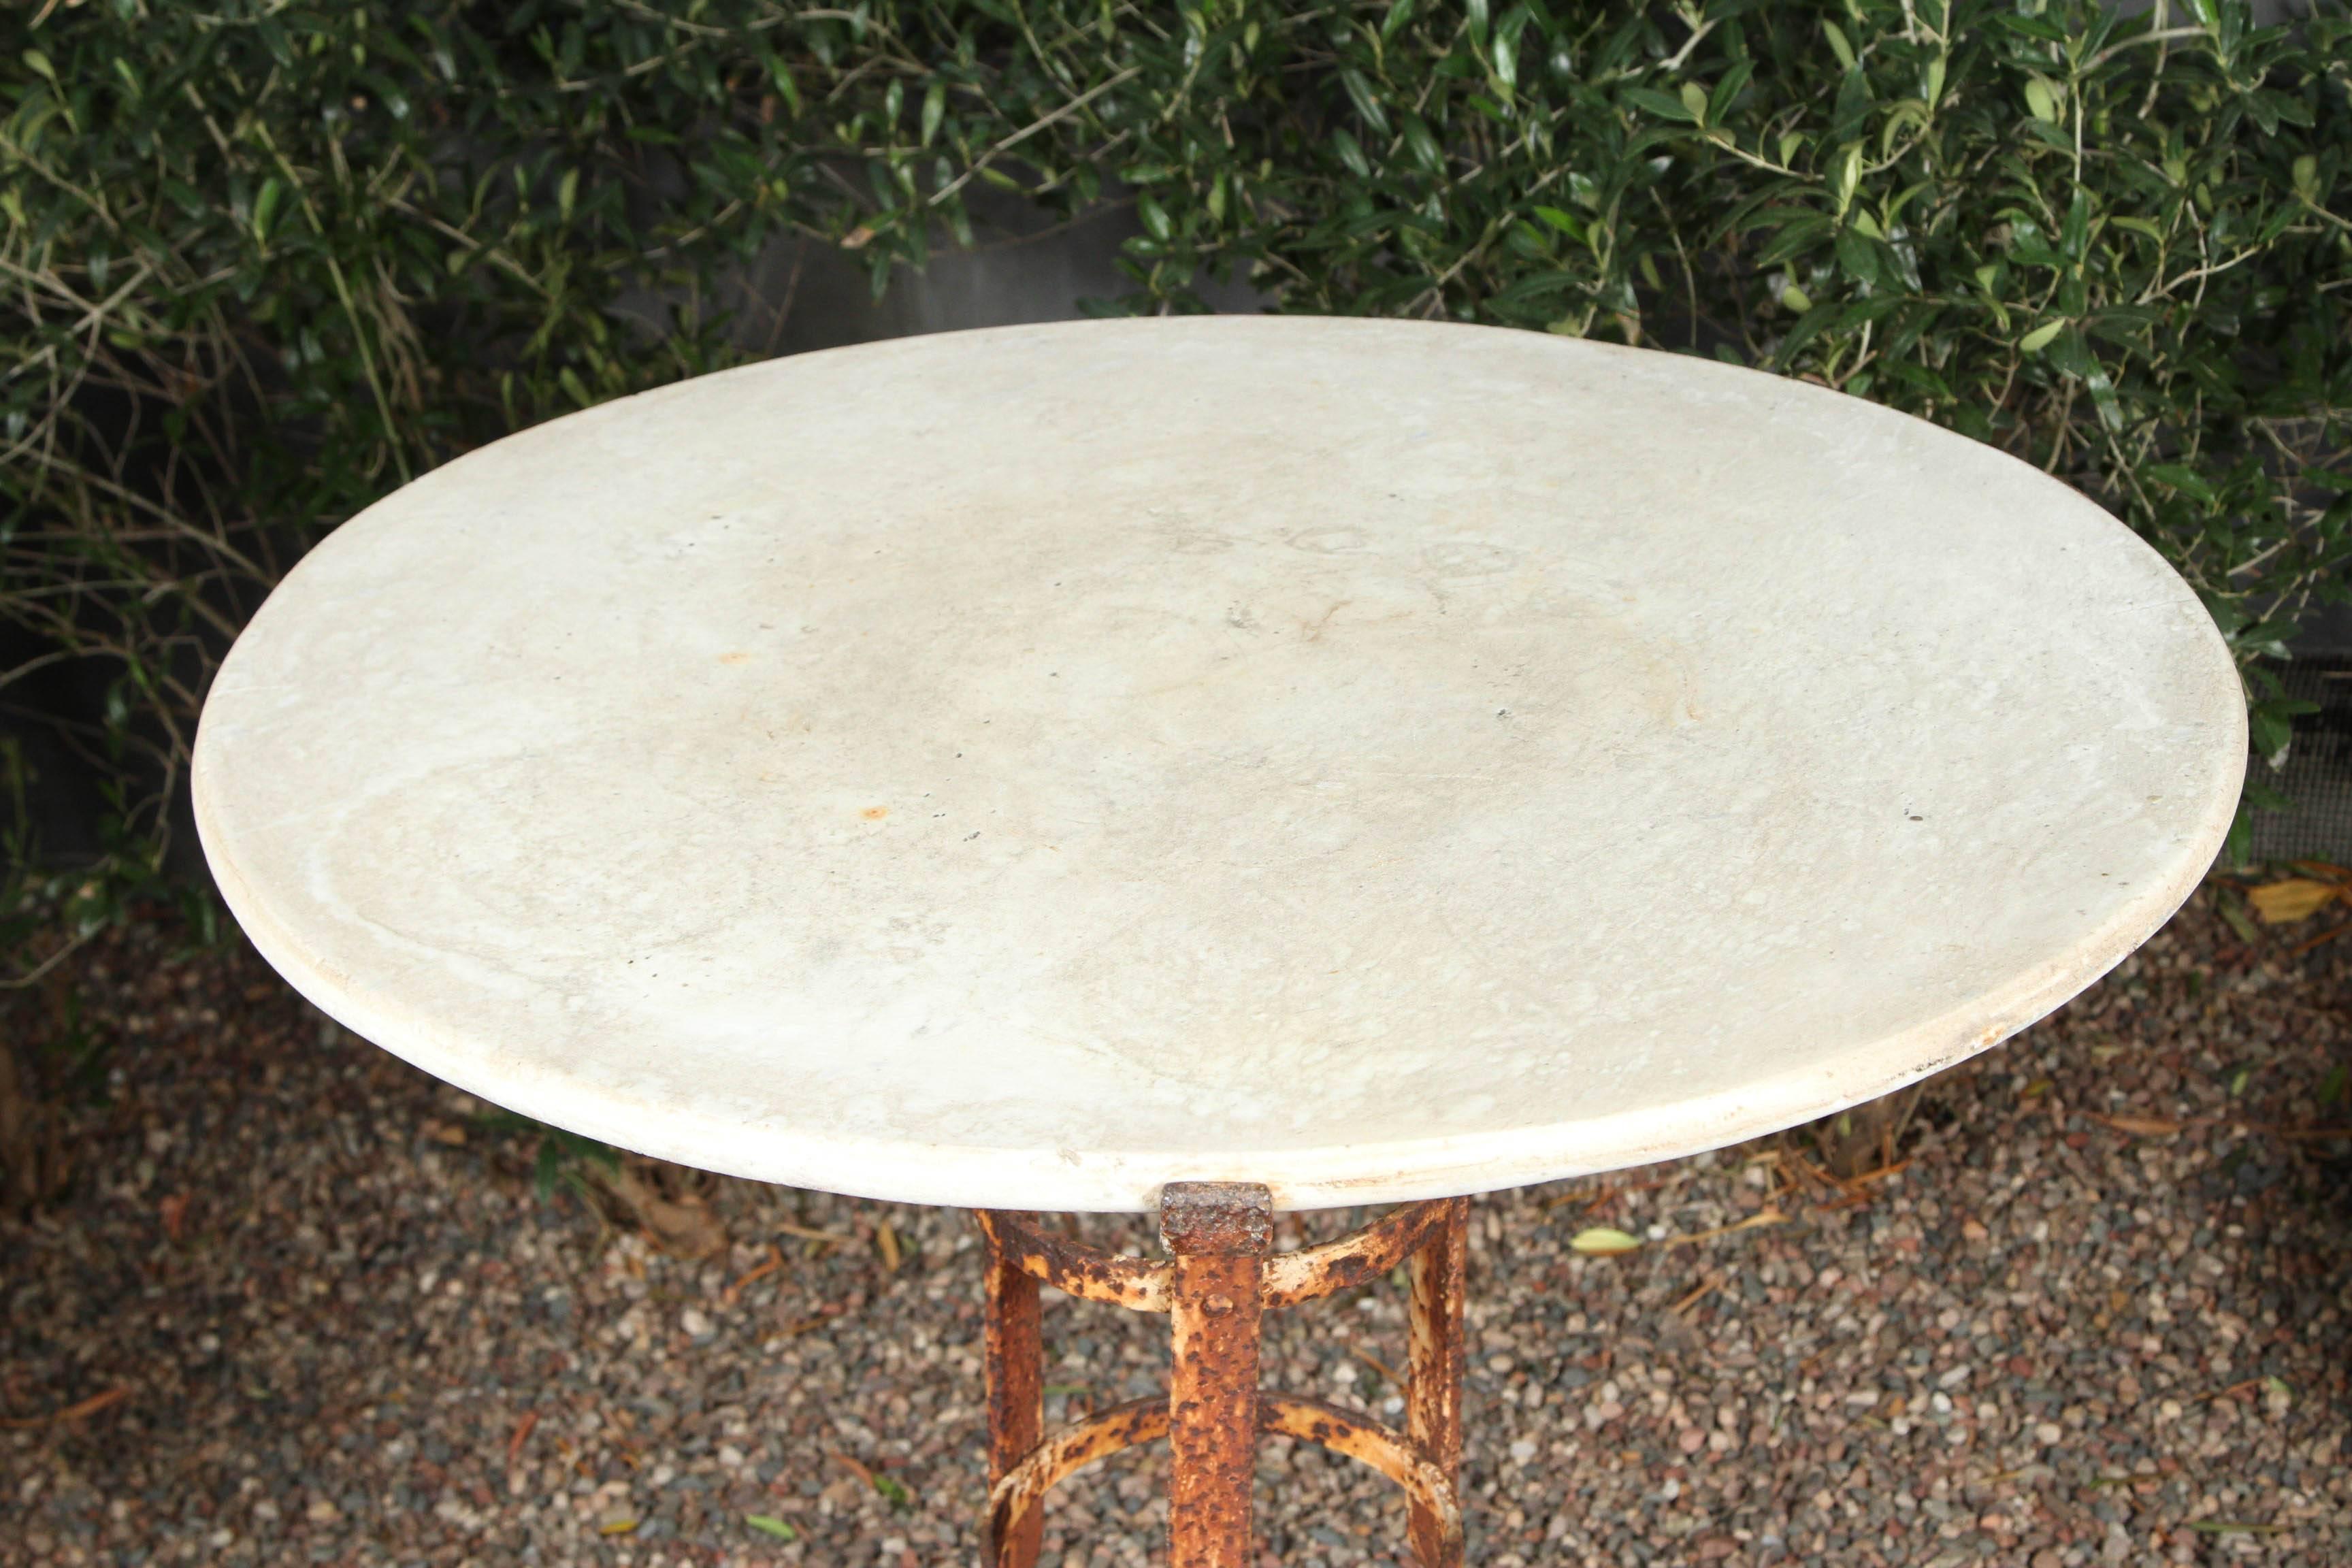 French Round Marble-Top and Iron Garden Table from Late 19th Century France